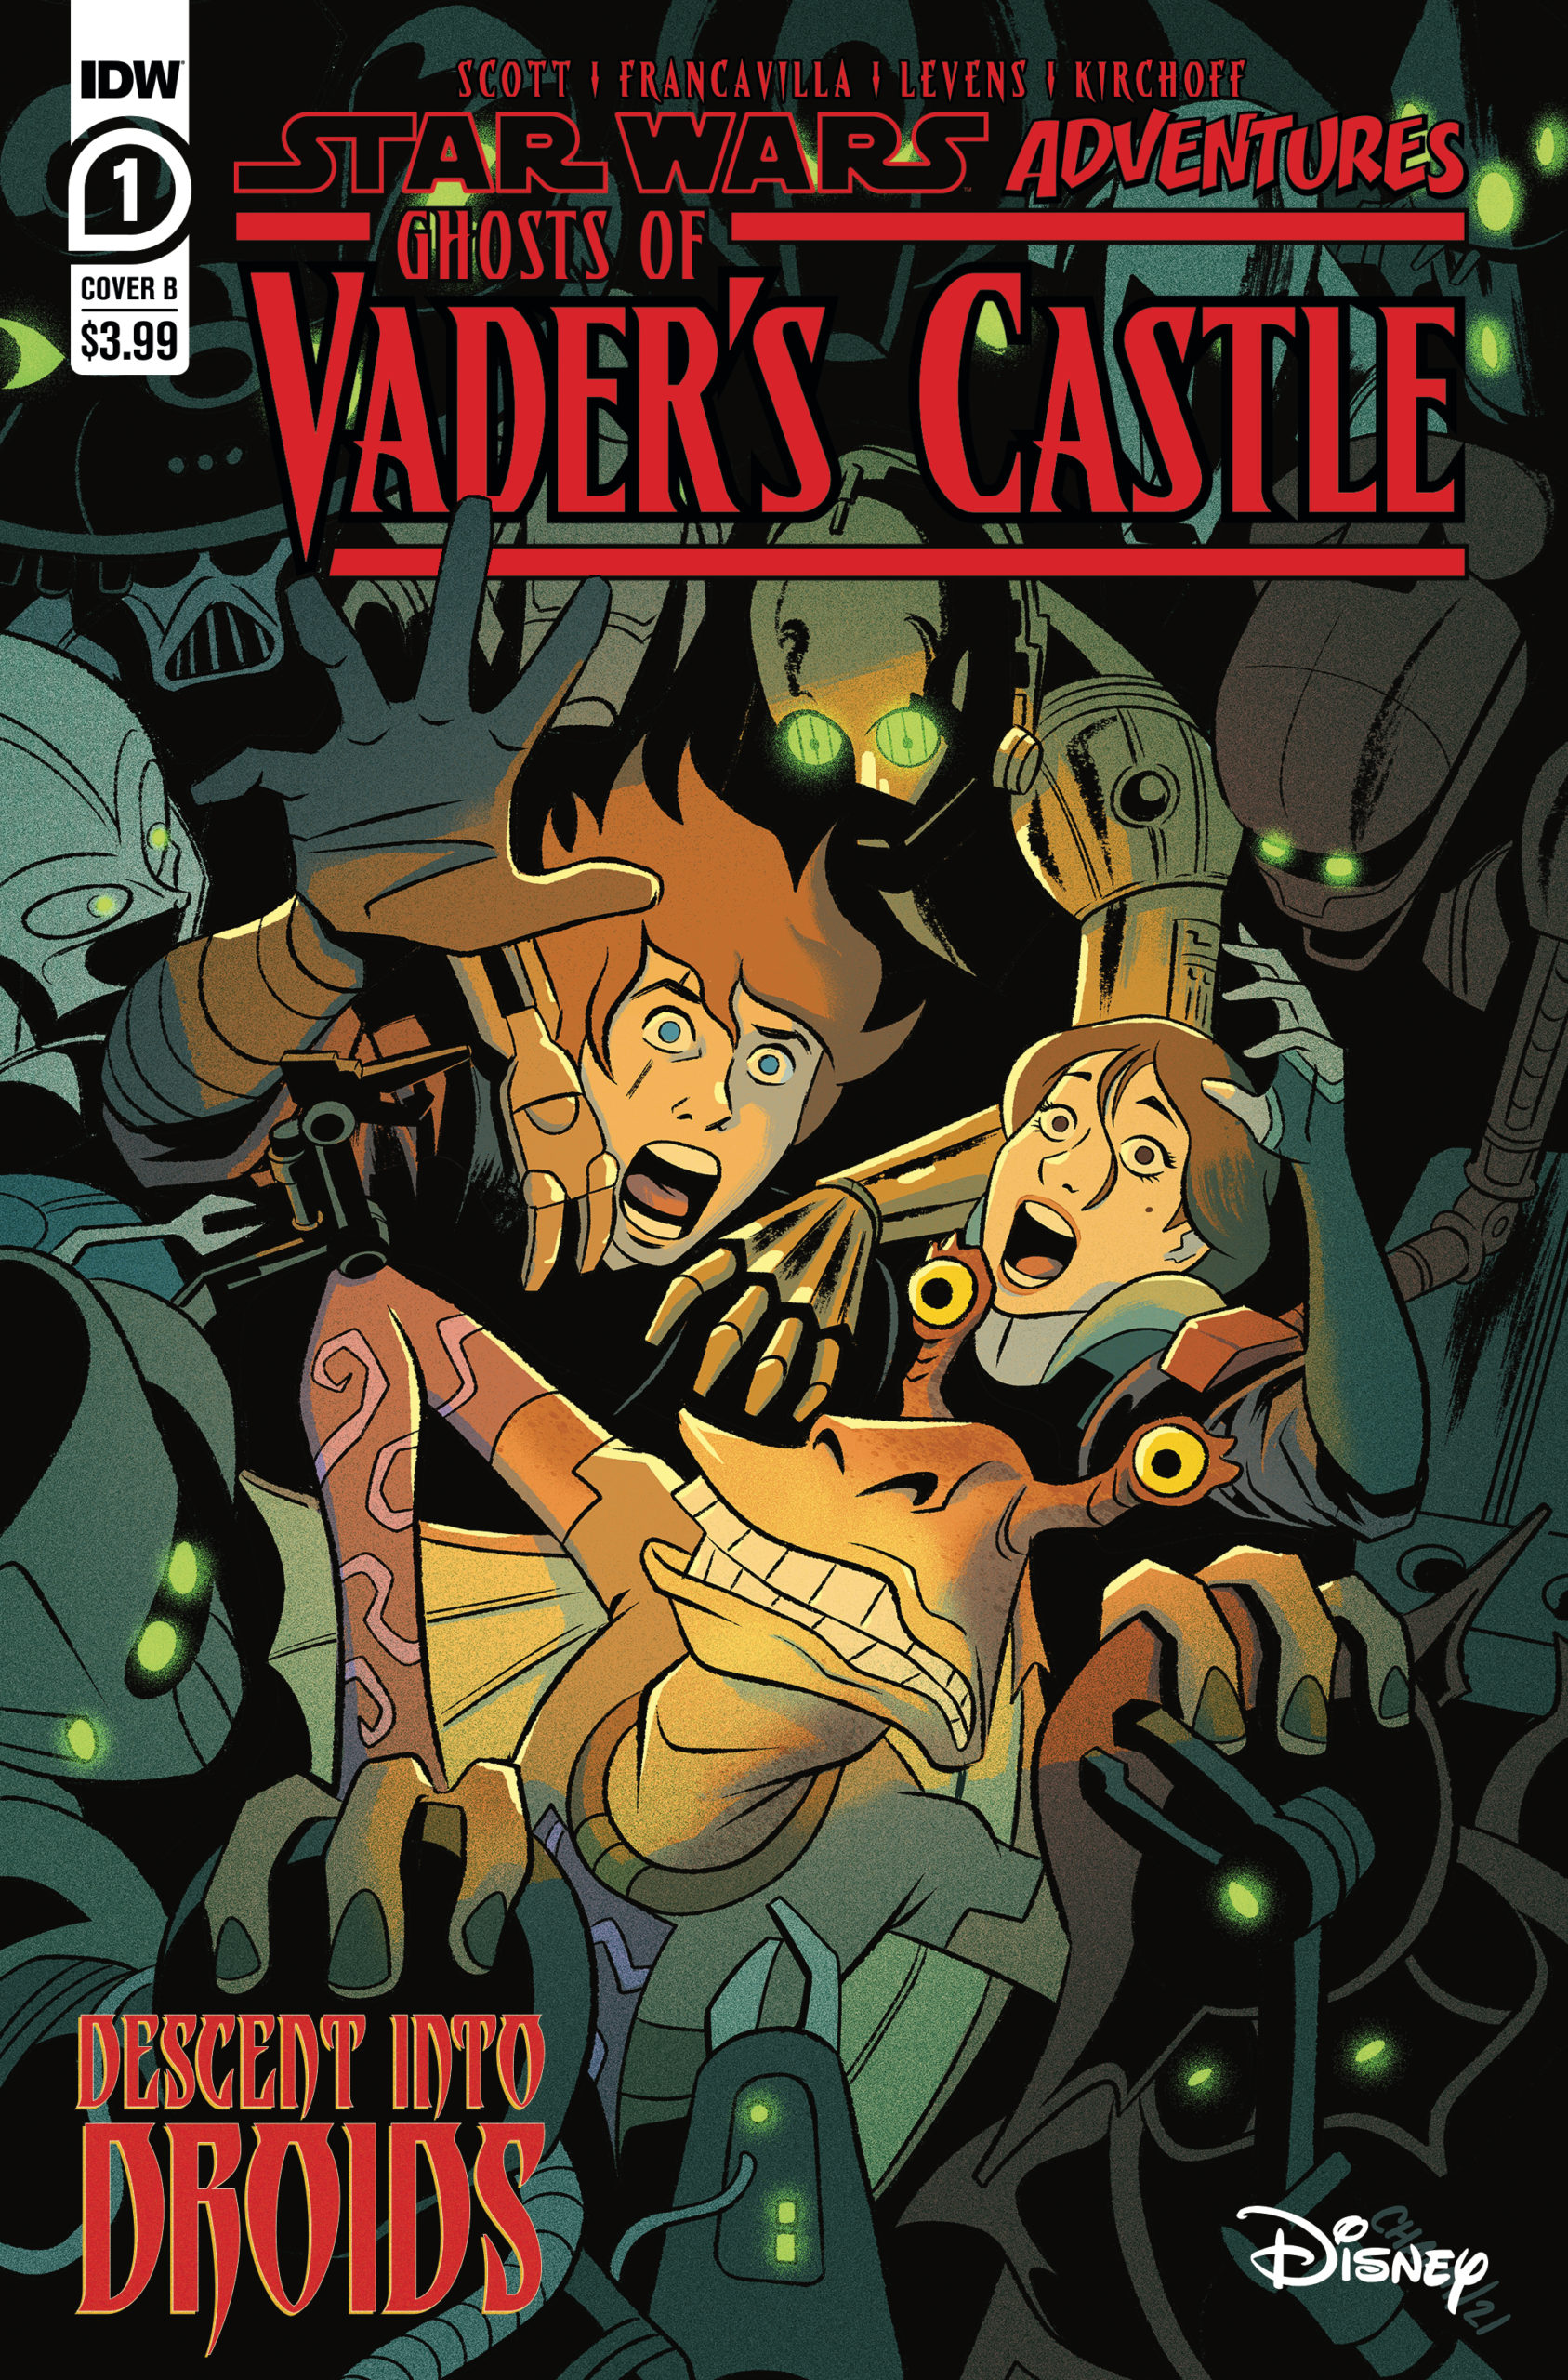 Ghosts of Vader's Castle #1 (Cover B by Derek Charm) (22.09.2021)